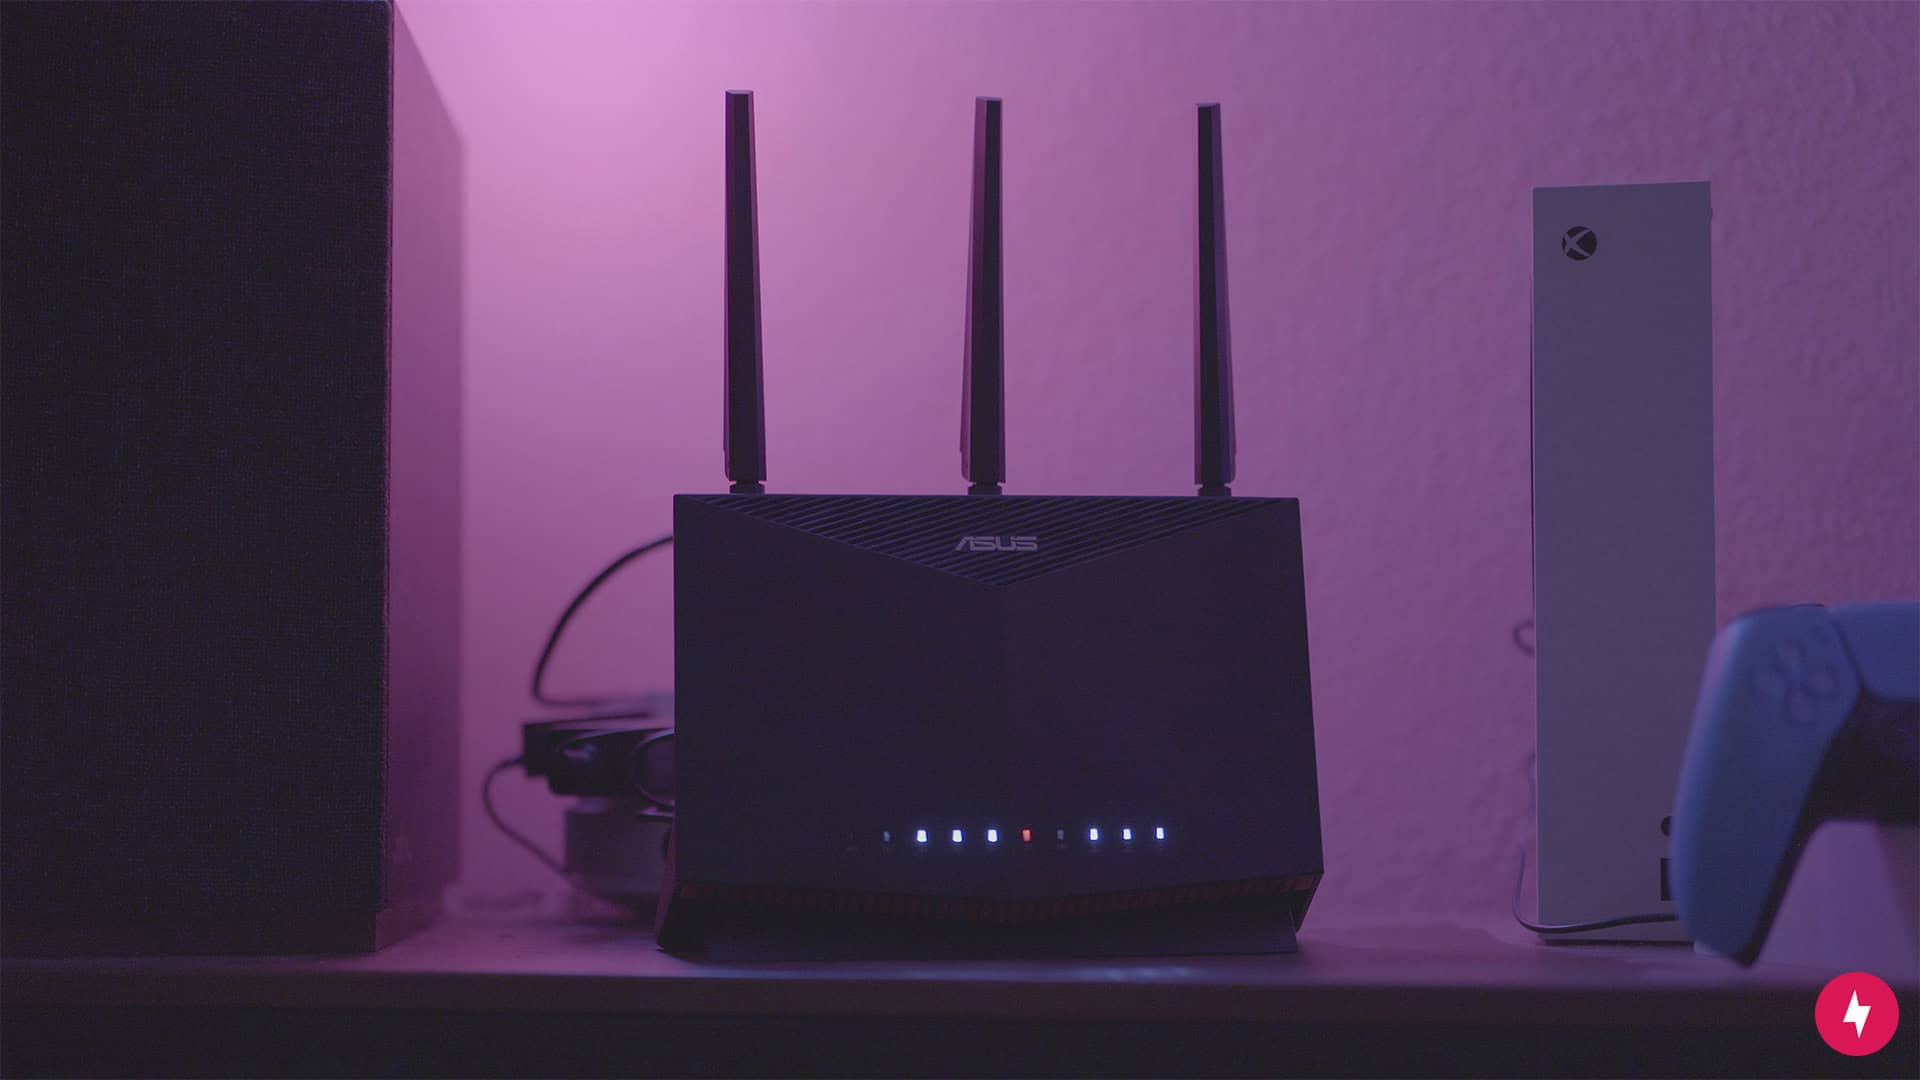 Asus RT-AX86U Pro router sitting on a table beside an Xbox Series S and a controller with a pink light in the background